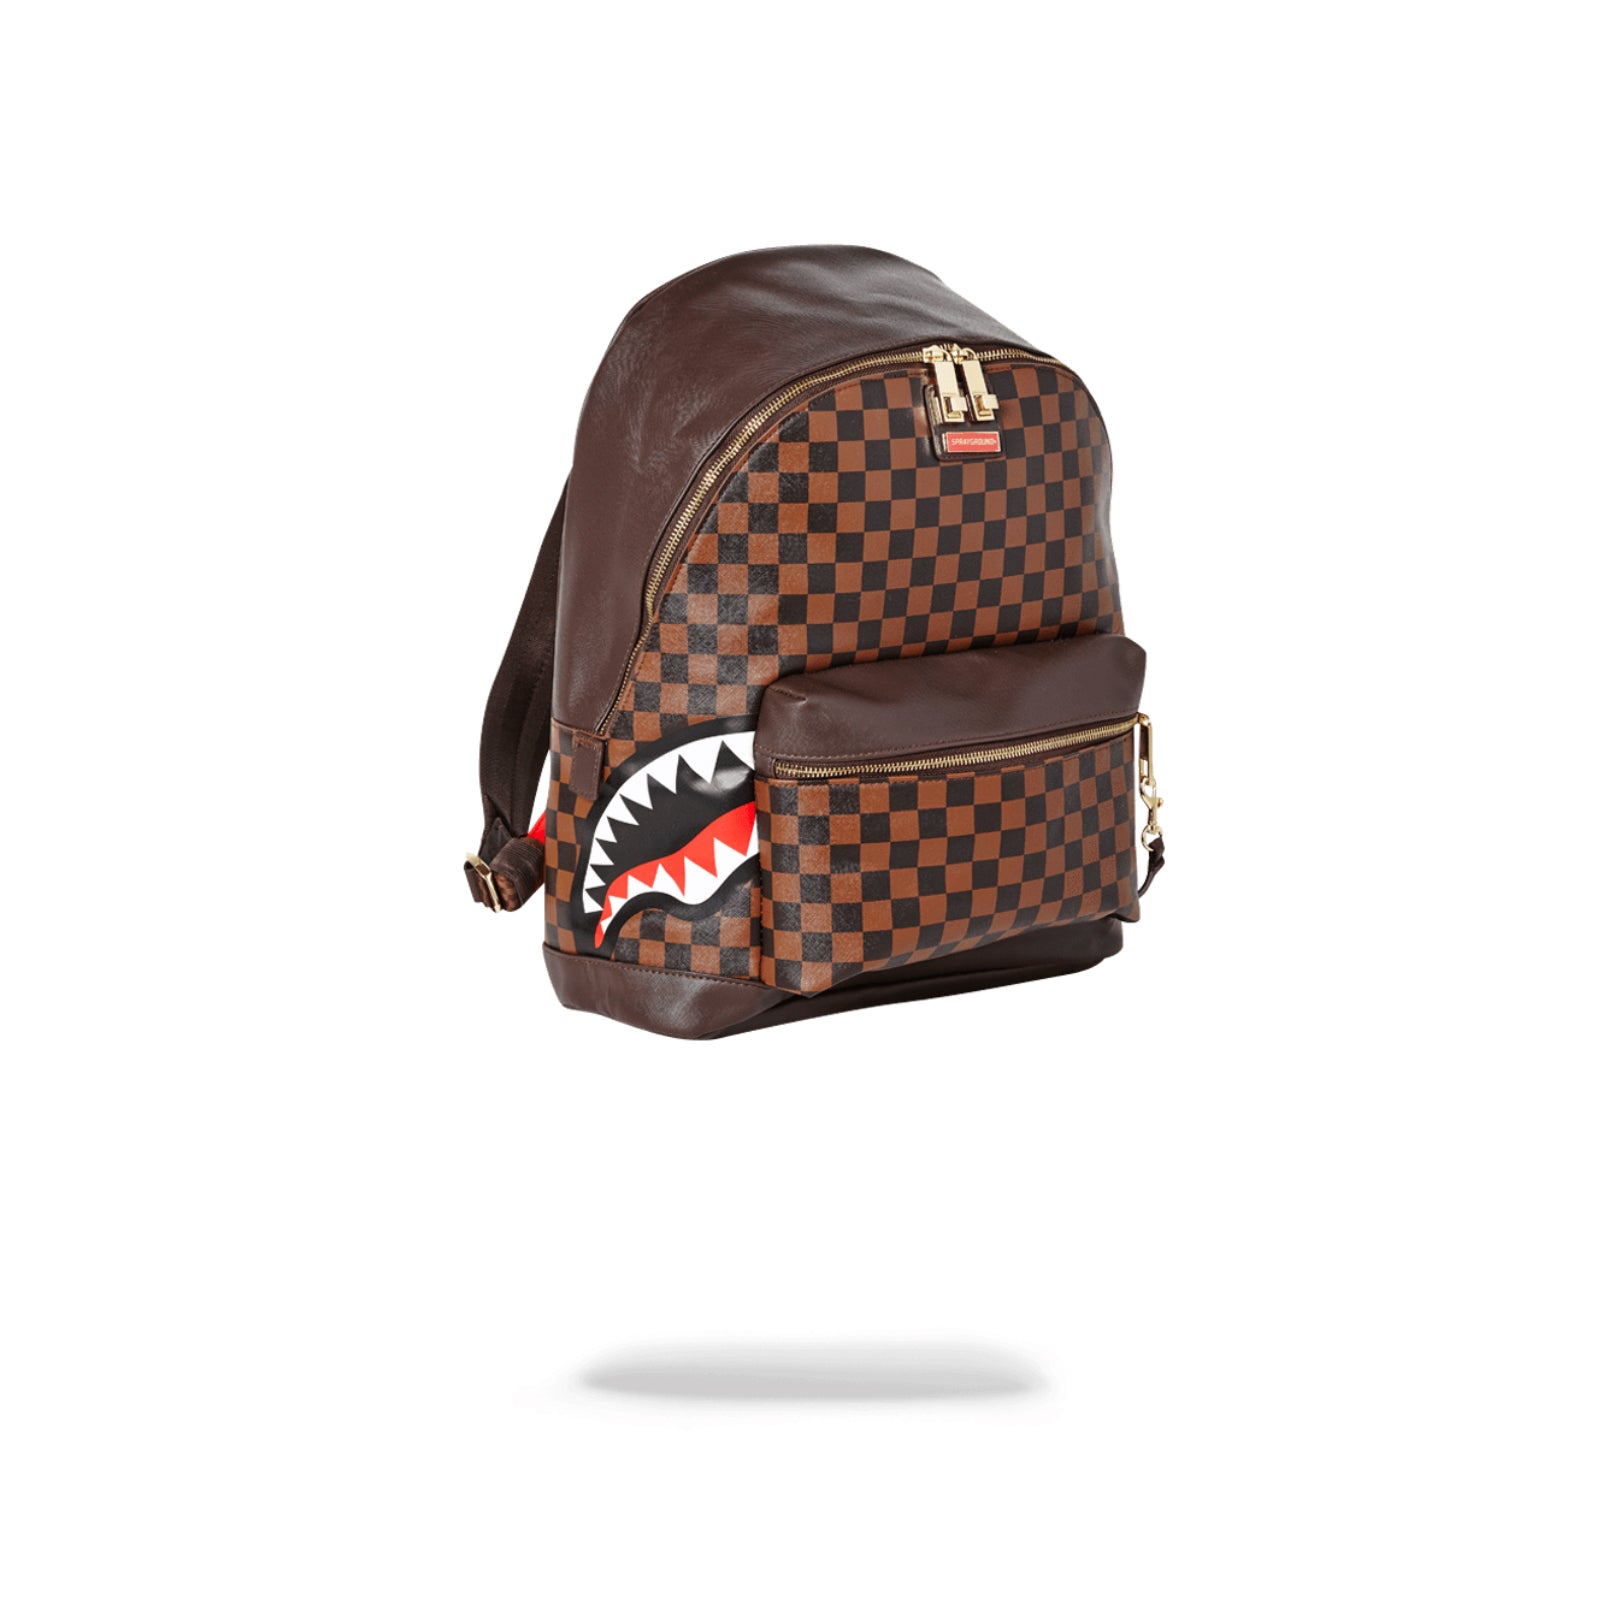 SPRAYGROUND Brown Backpack Tagged Up Sharks in Paris Backpack 910B5119NSZ